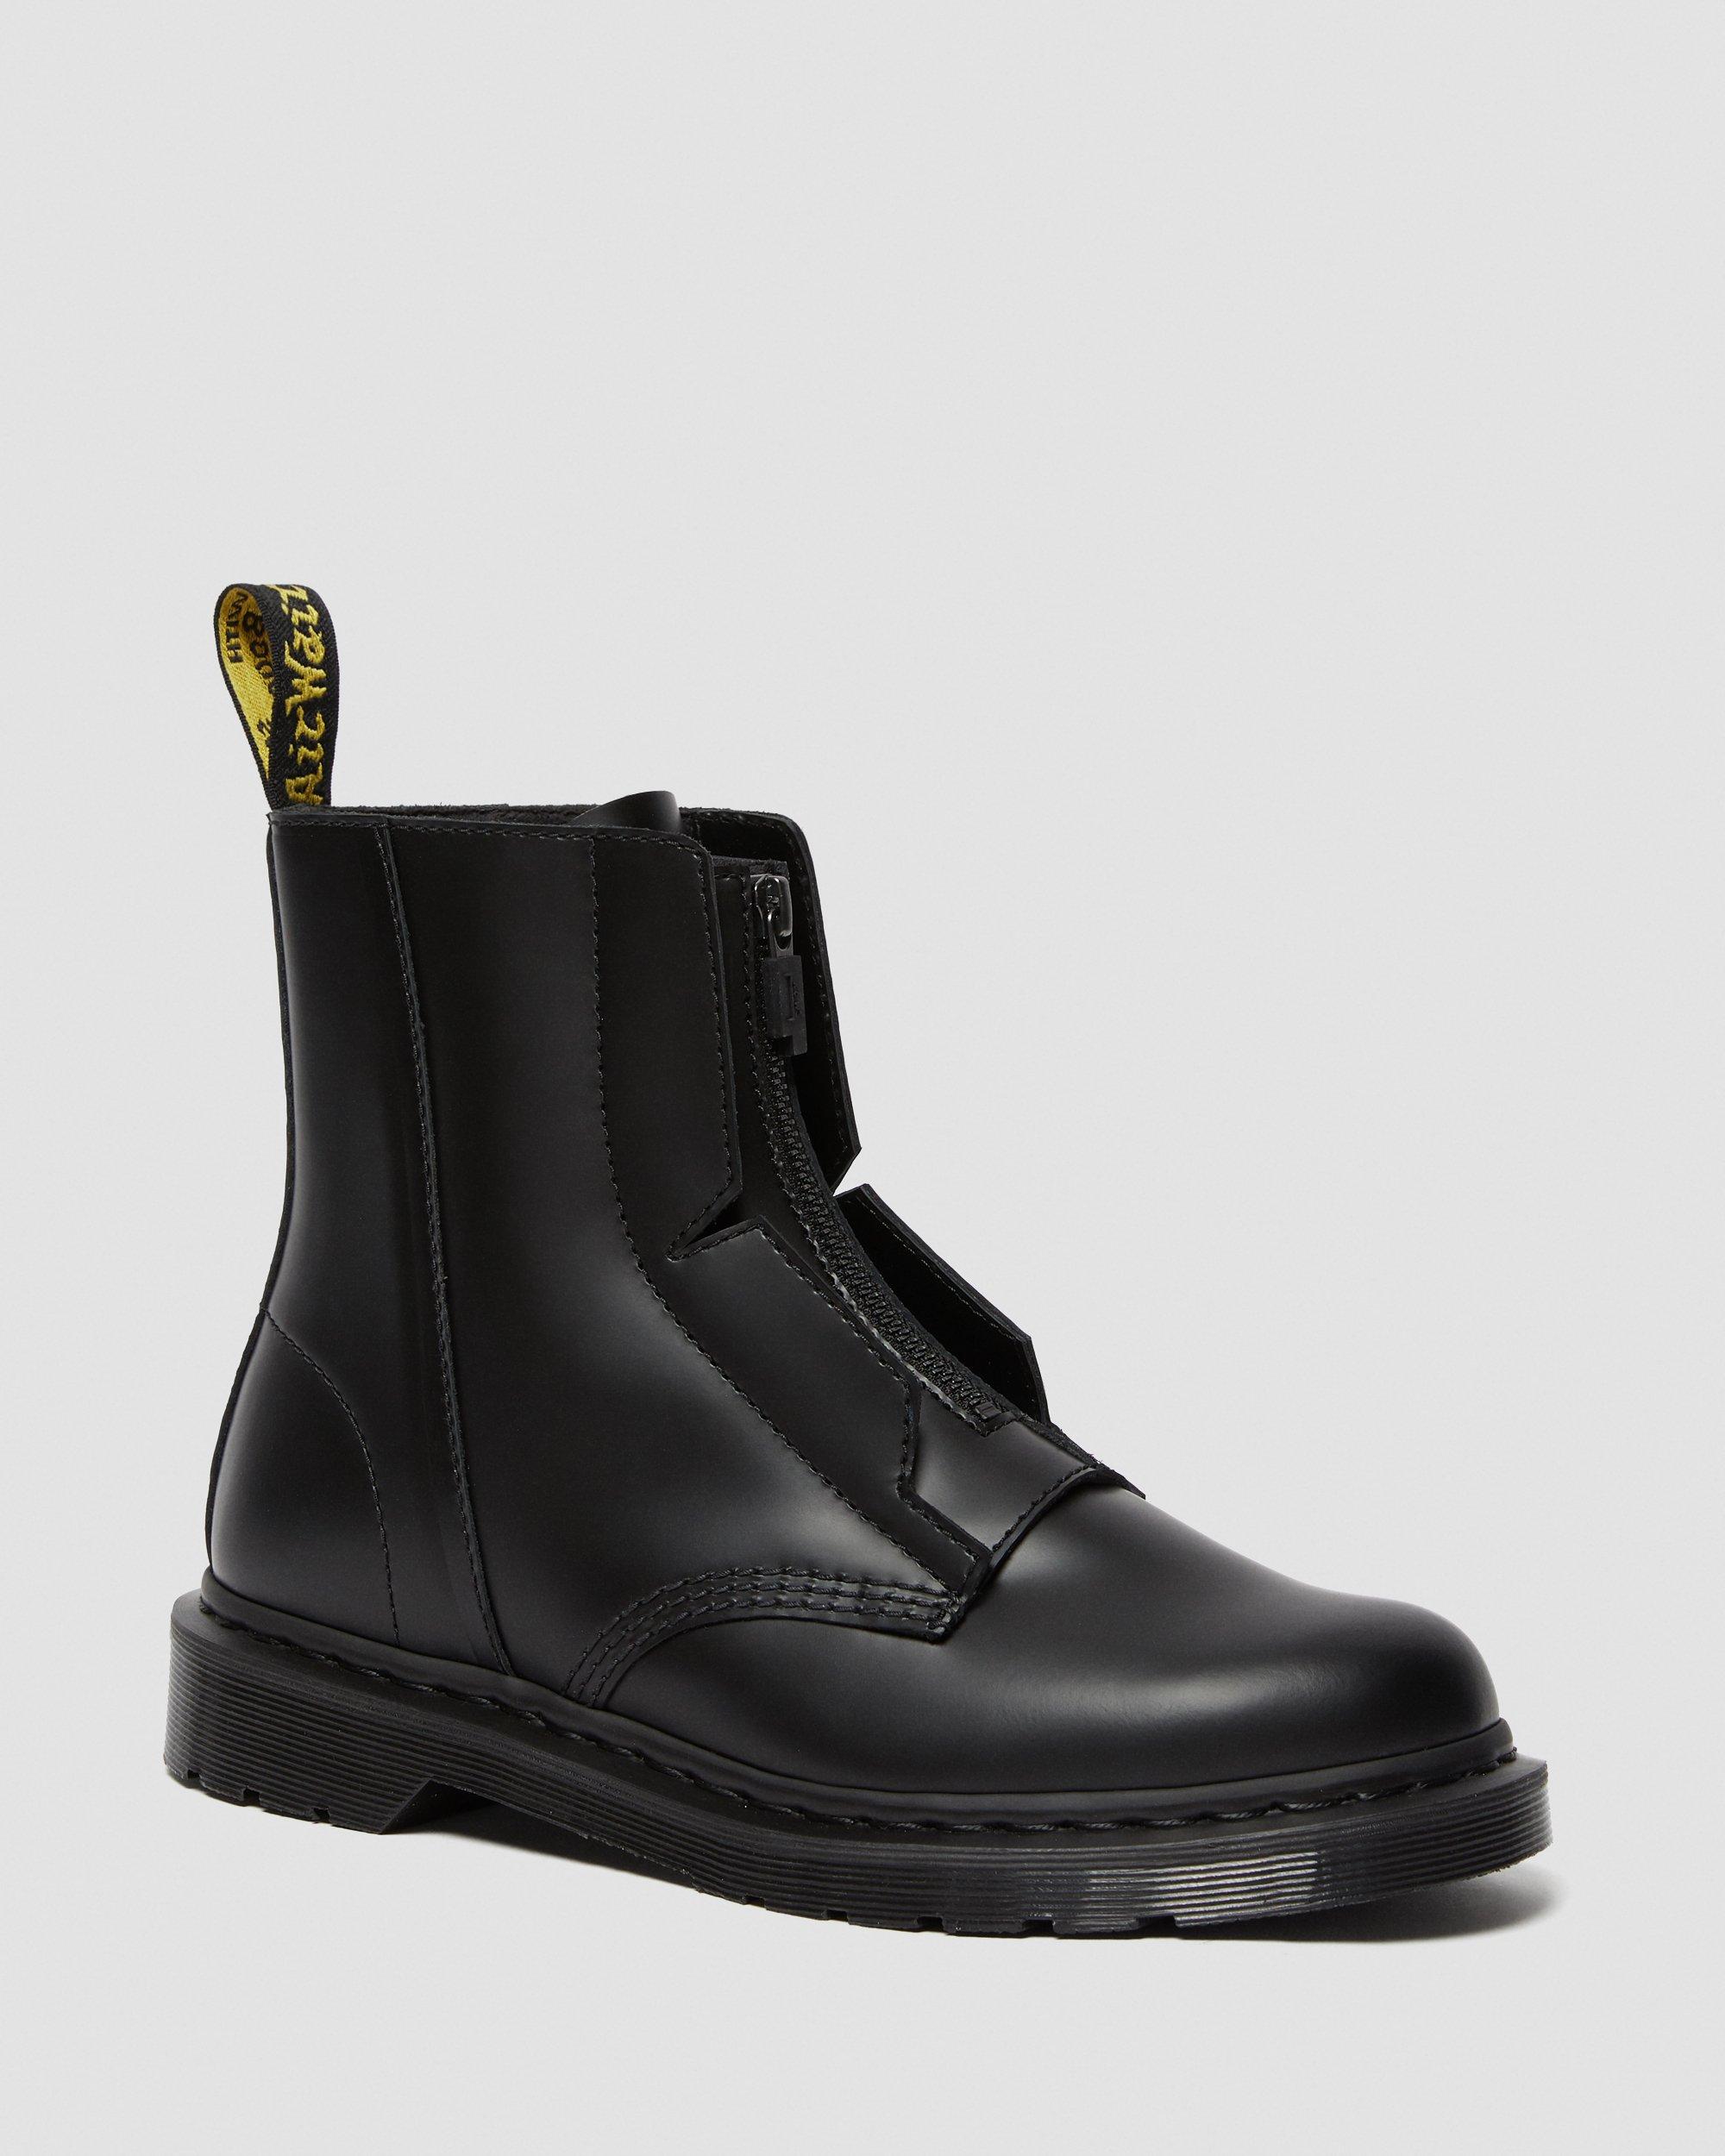 https://i1.adis.ws/i/drmartens/26518001.91.jpg?$large$1460 A-COLD-WALL* LEATHER ANKLE BOOTS Dr. Martens